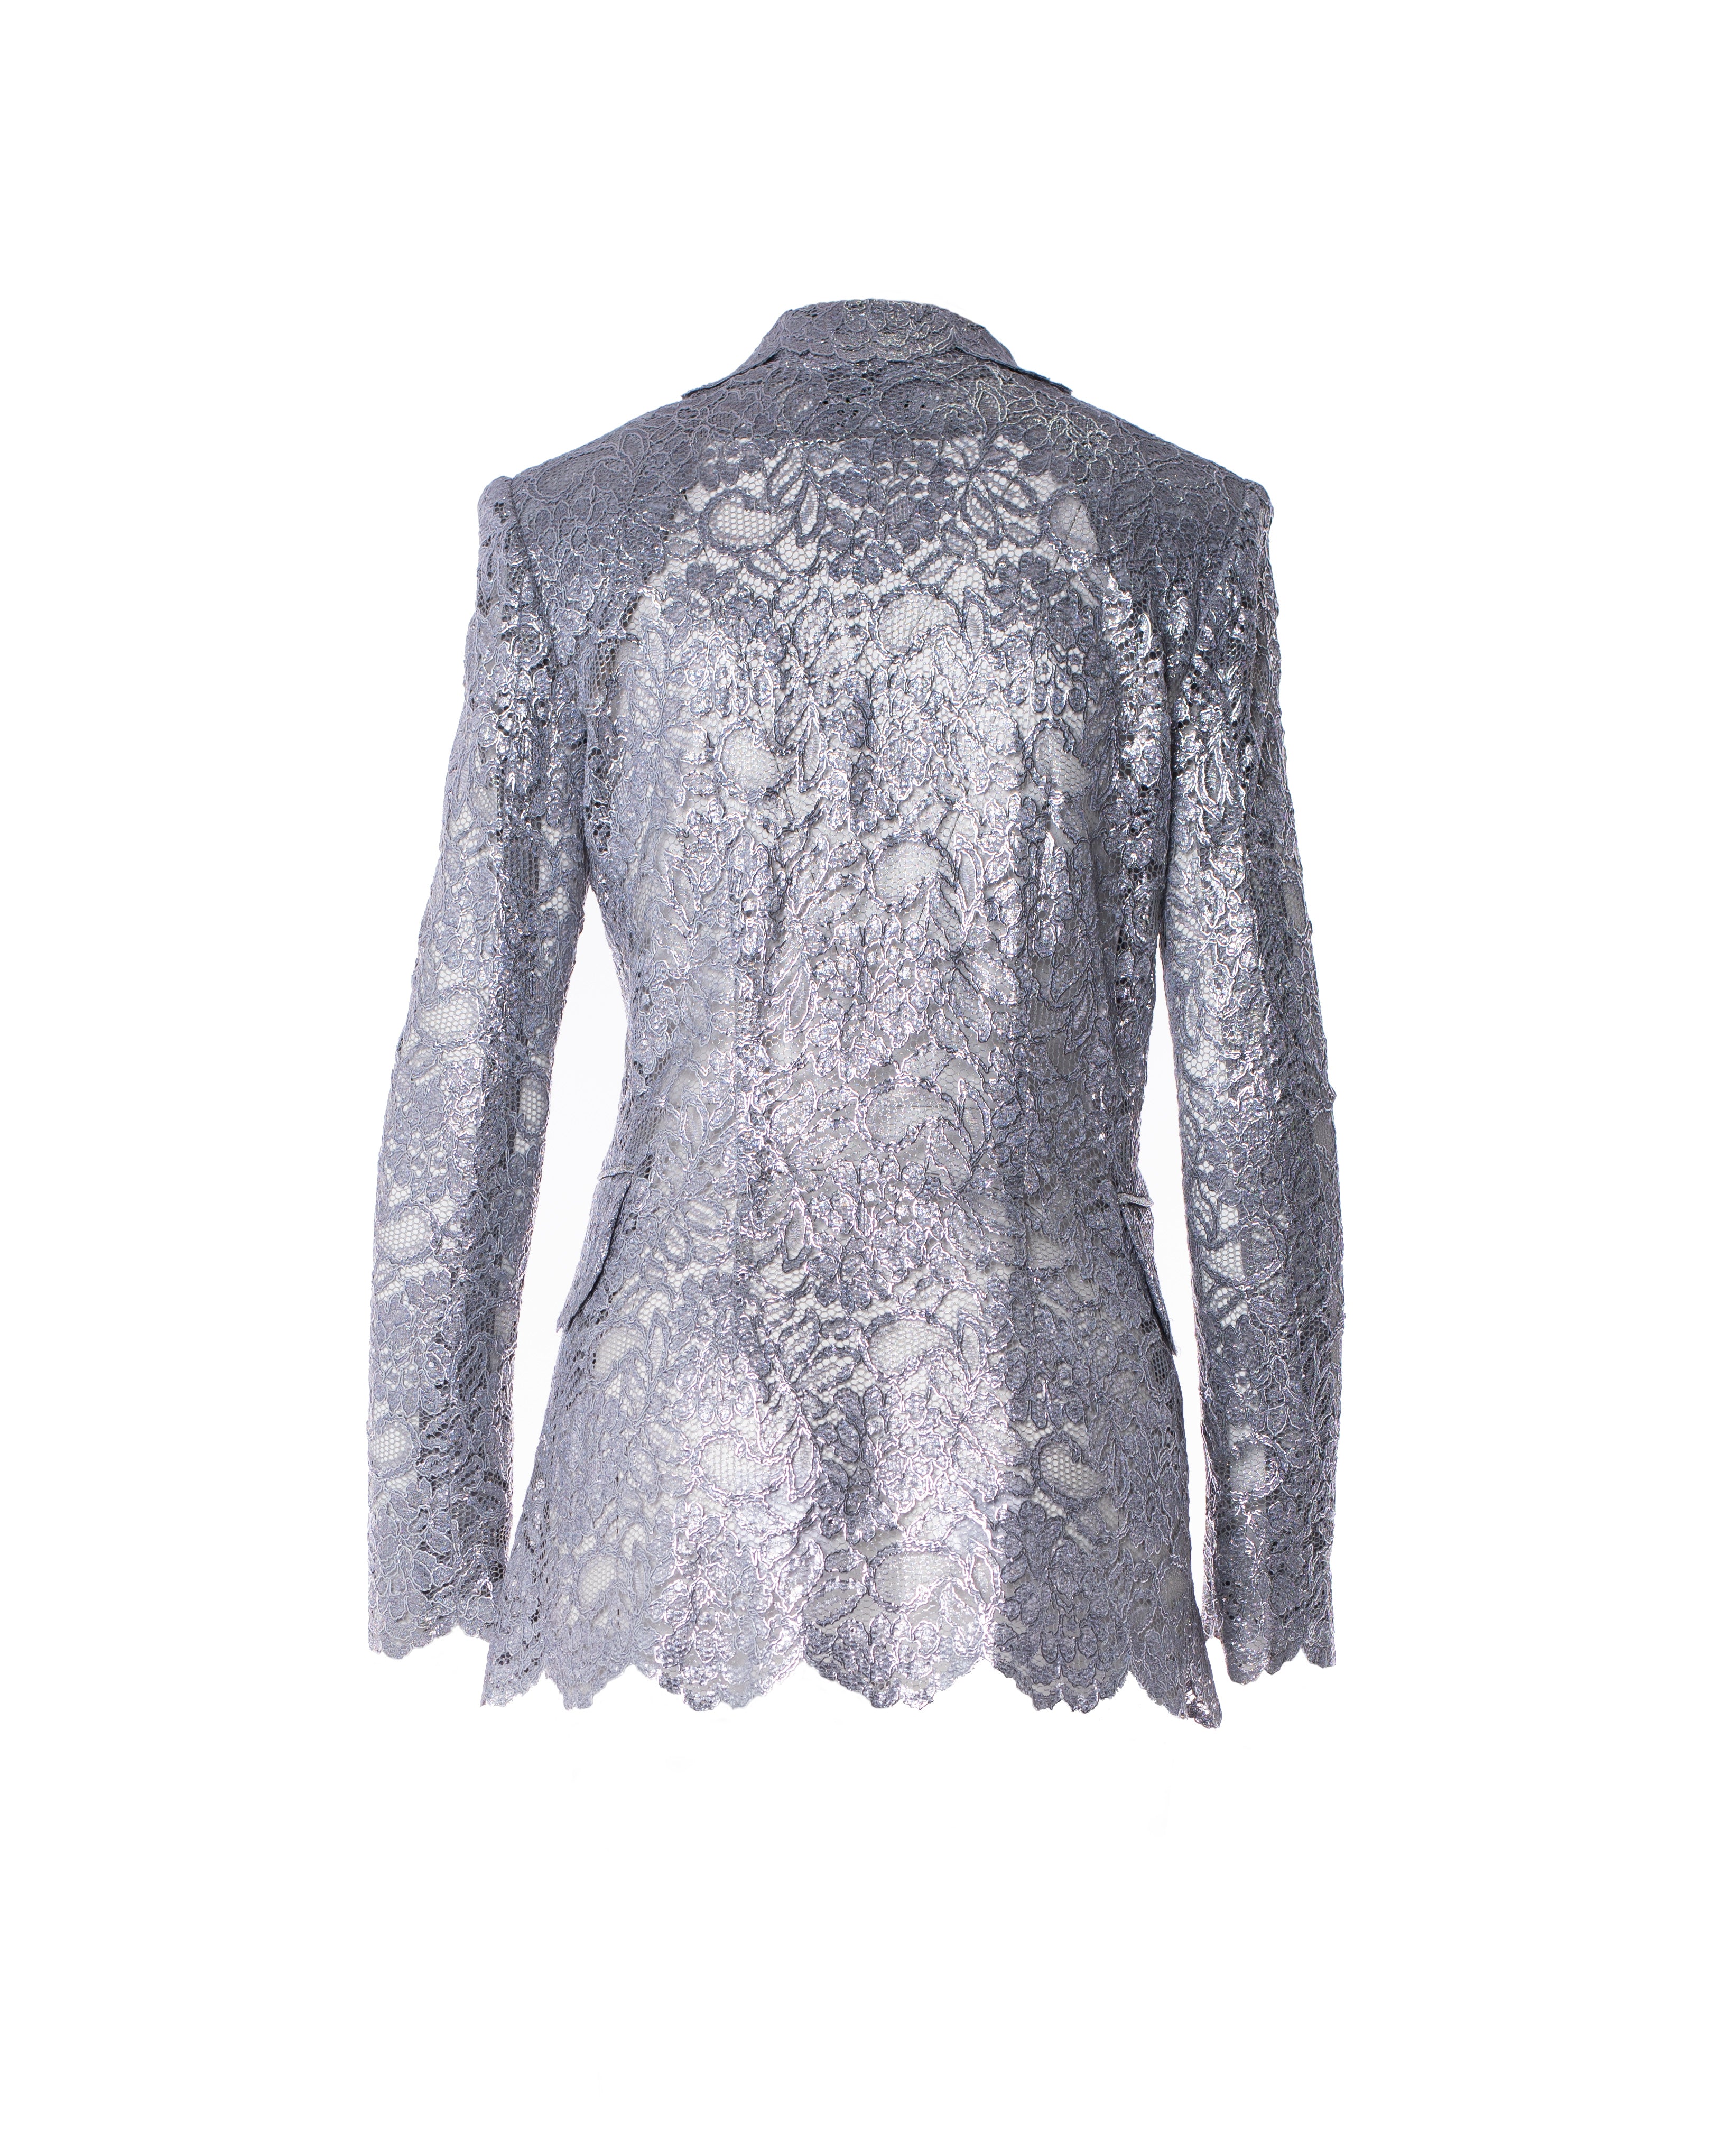 vintage Art lace easy tailored jacket